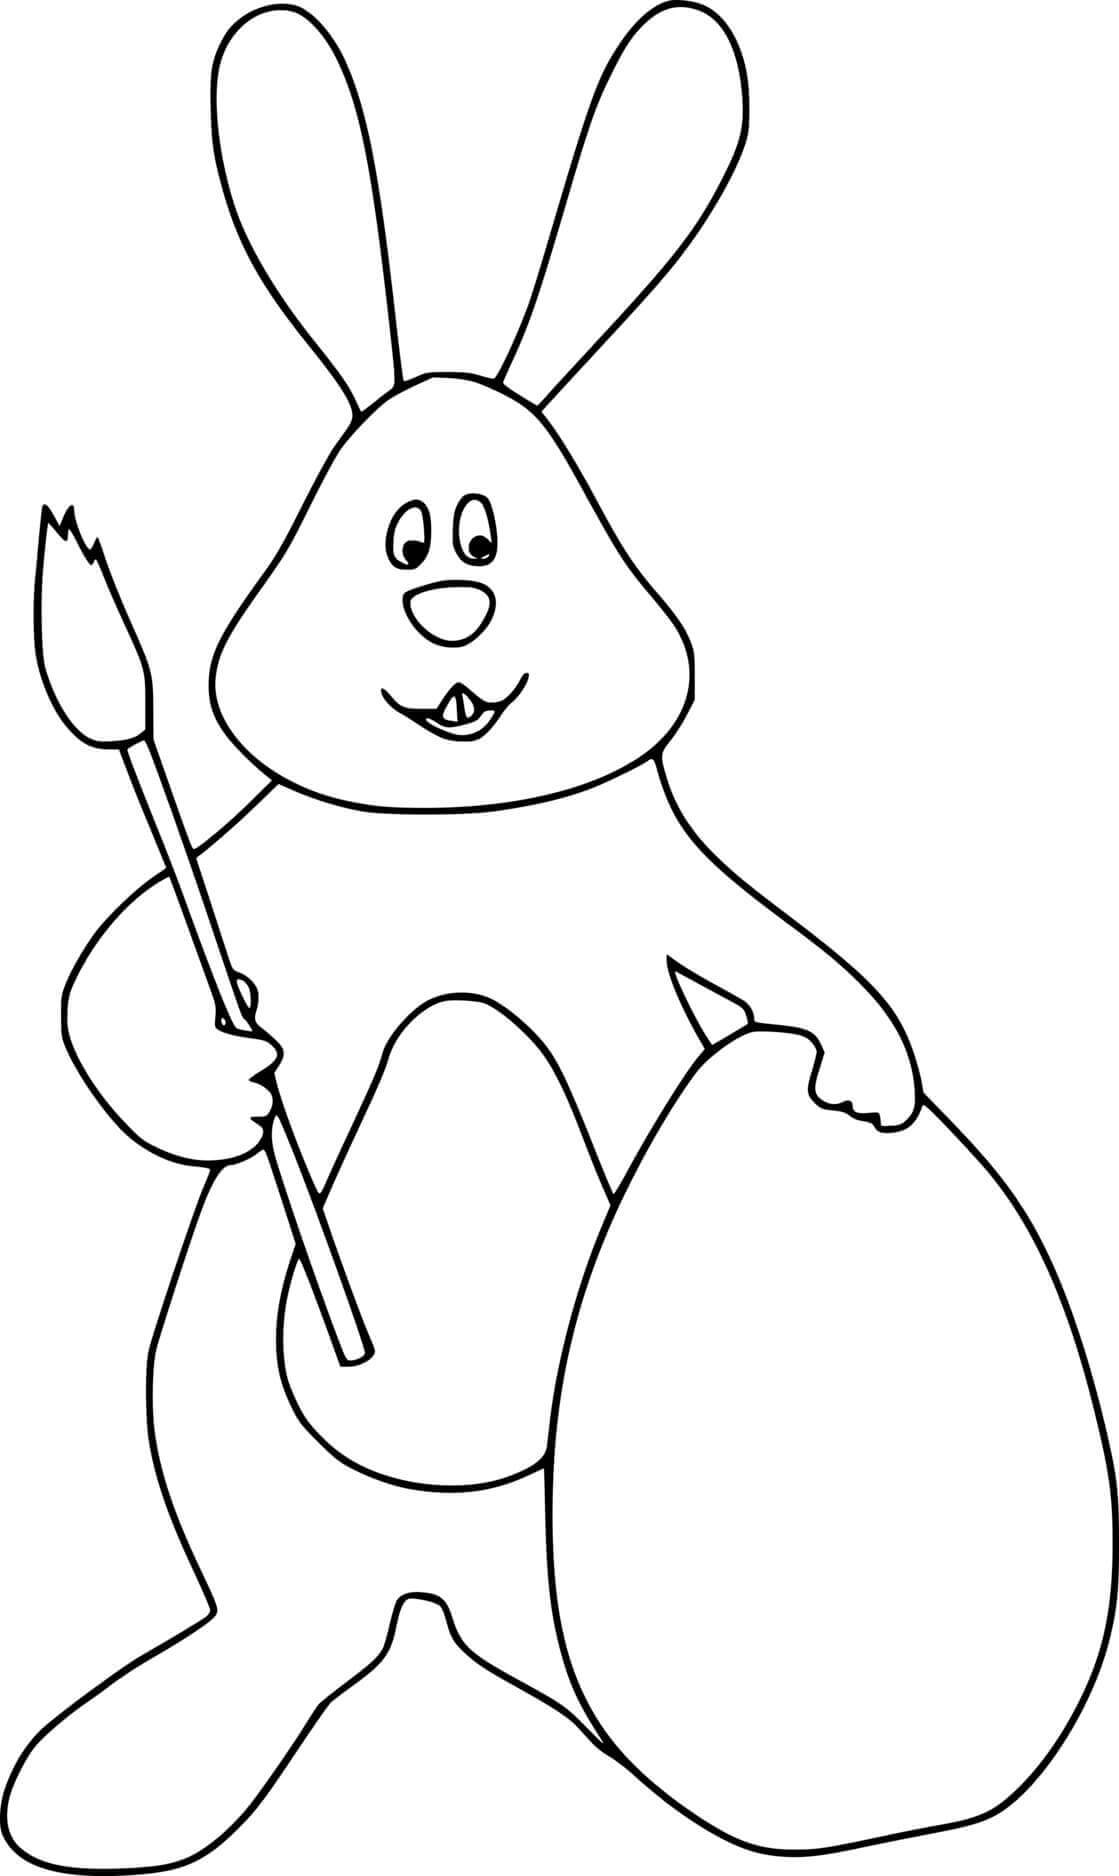 Simple Easter Bunny Coloring Page